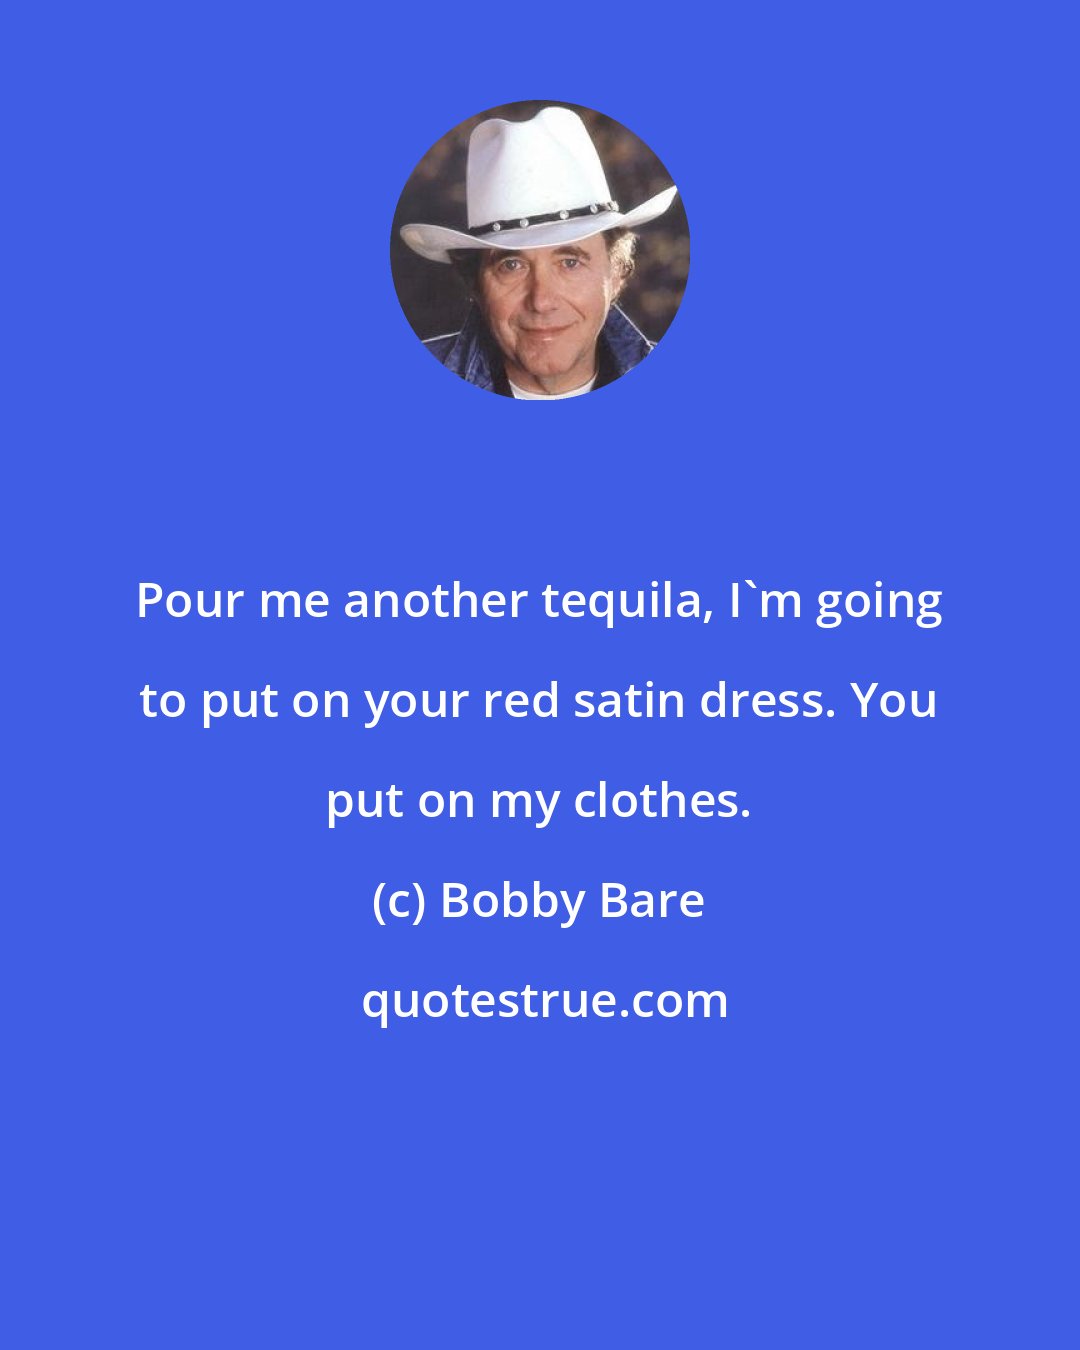 Bobby Bare: Pour me another tequila, I'm going to put on your red satin dress. You put on my clothes.